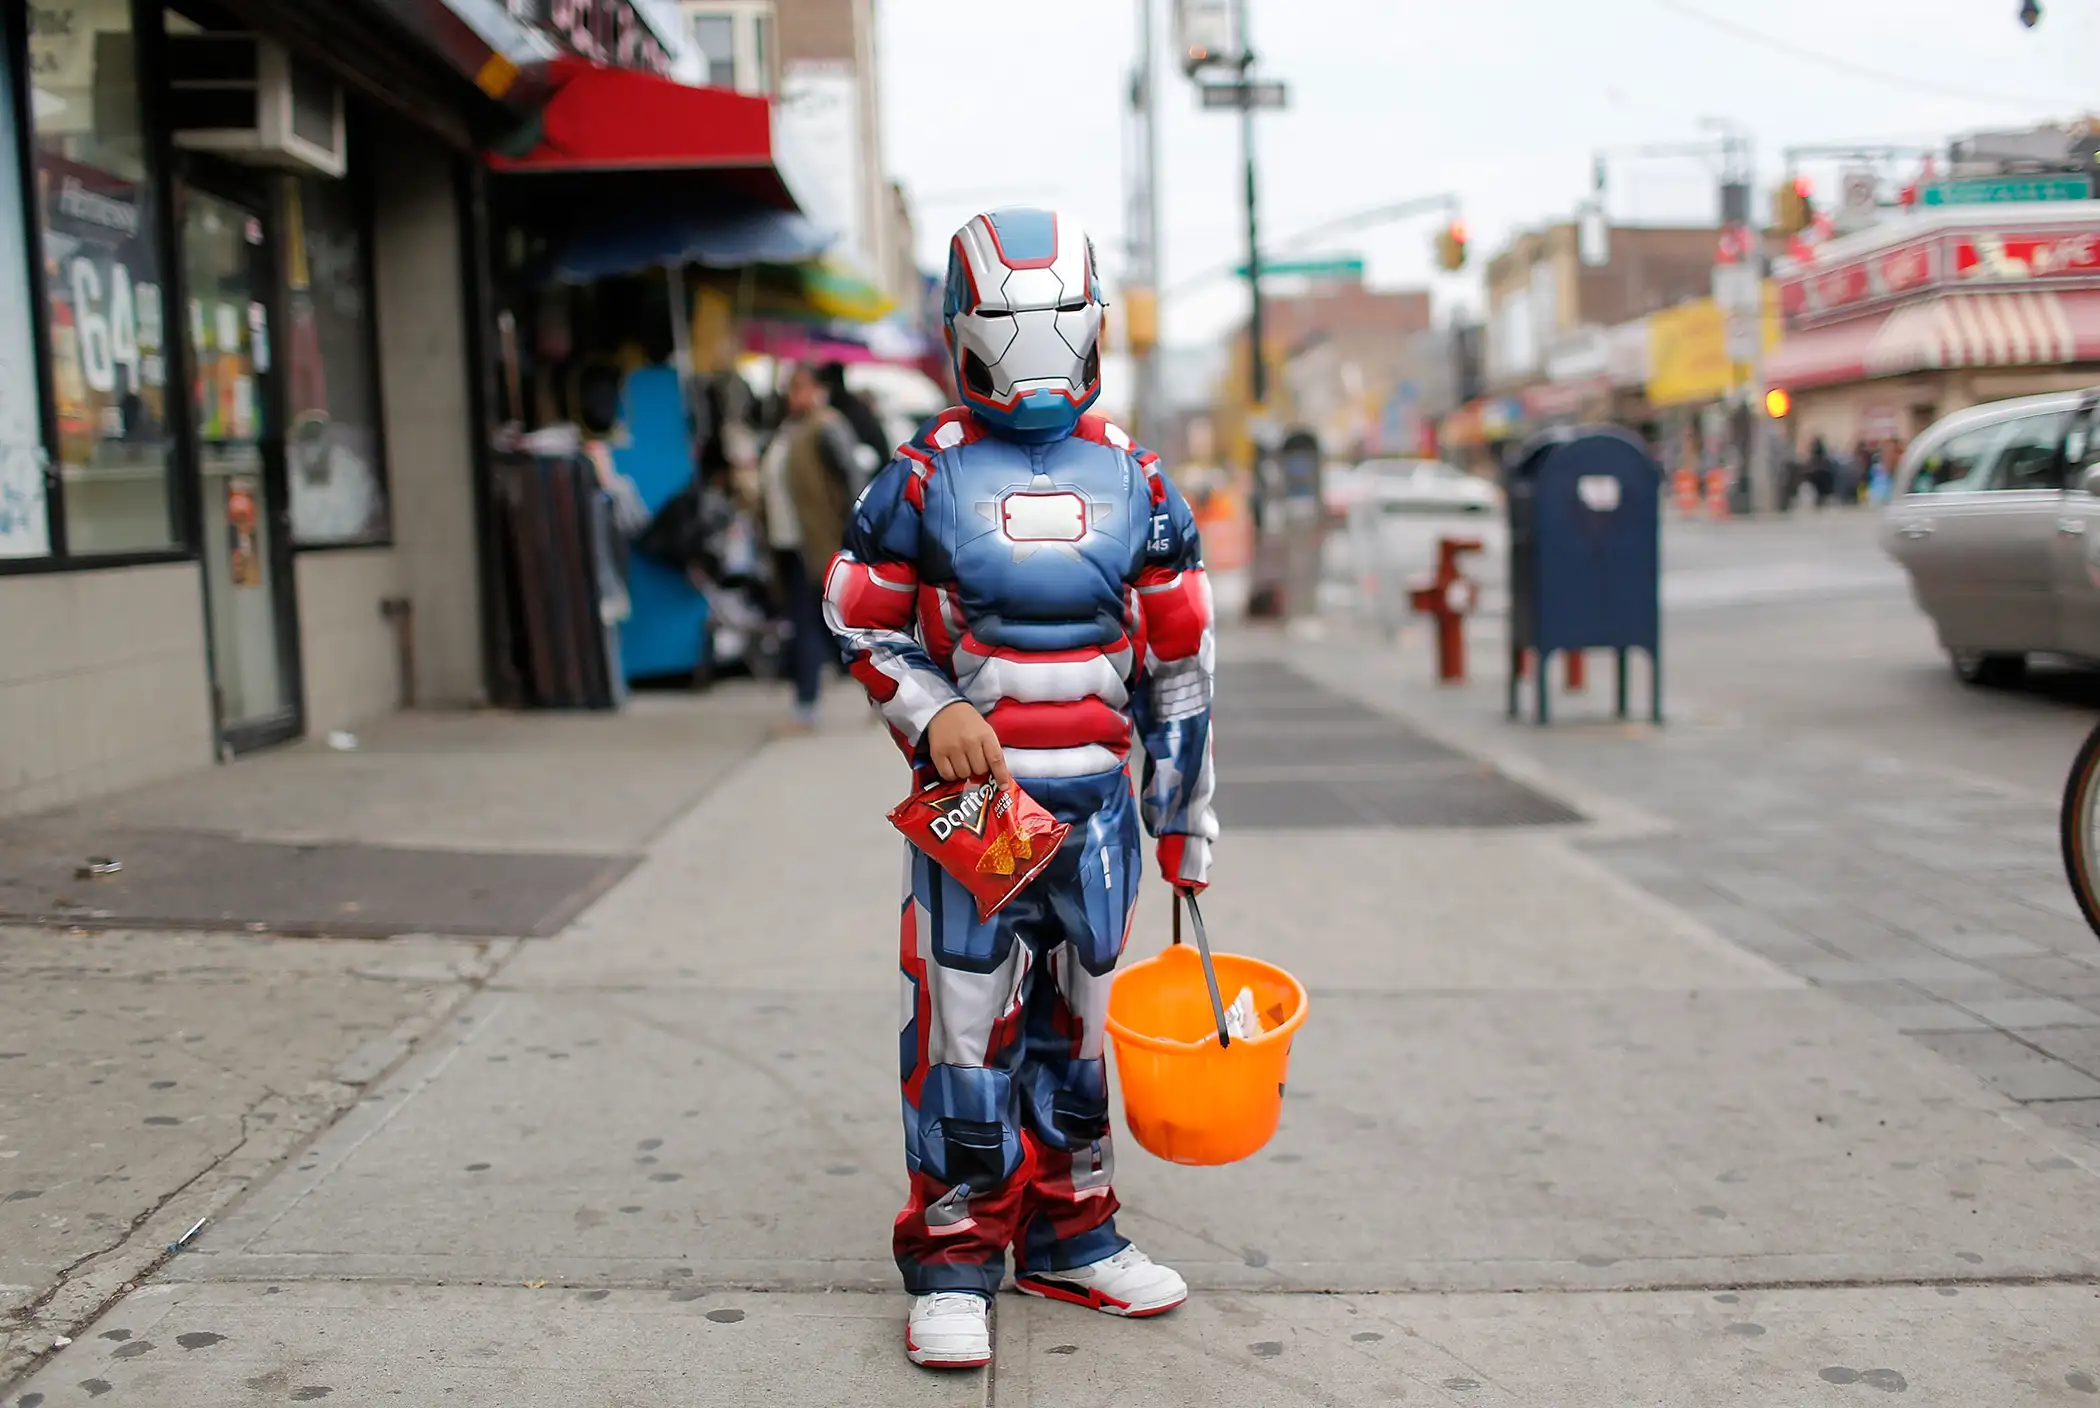 Ethan  of Bedford-Stuyvesant poses for a photo as he  Trick or Treats  in Bedford-Stuyvesant, Brooklyn on October 31, 2013 in New York City.